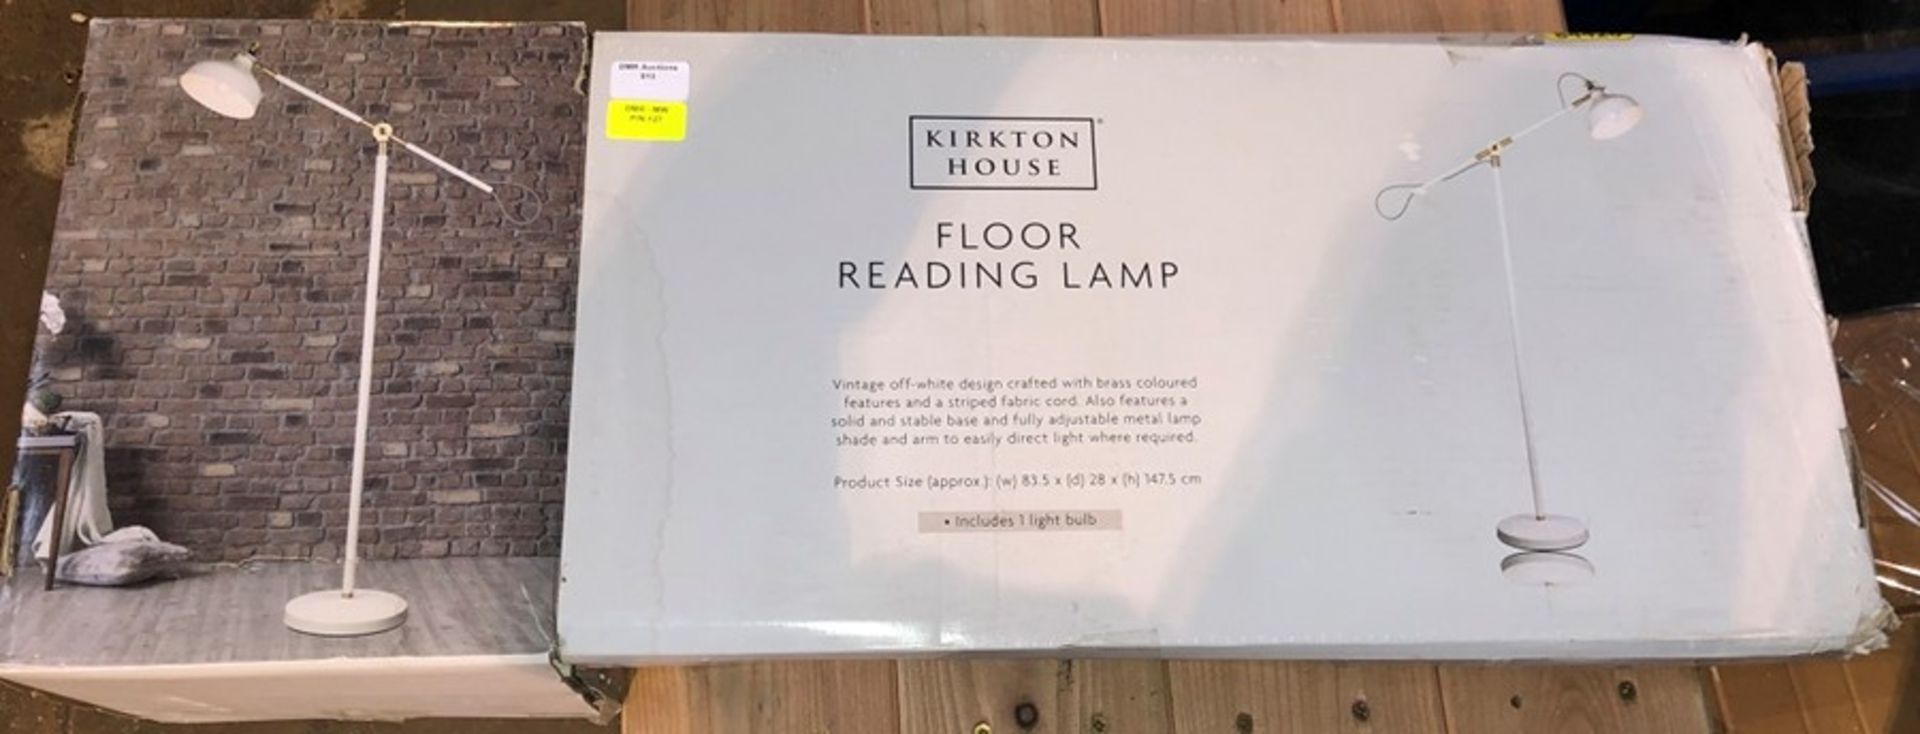 1 BOXED KIRKTON HOUSE FLOOR READING LAMP / RRP £46.99 (PUBLIC VIEWING AVAILABLE)